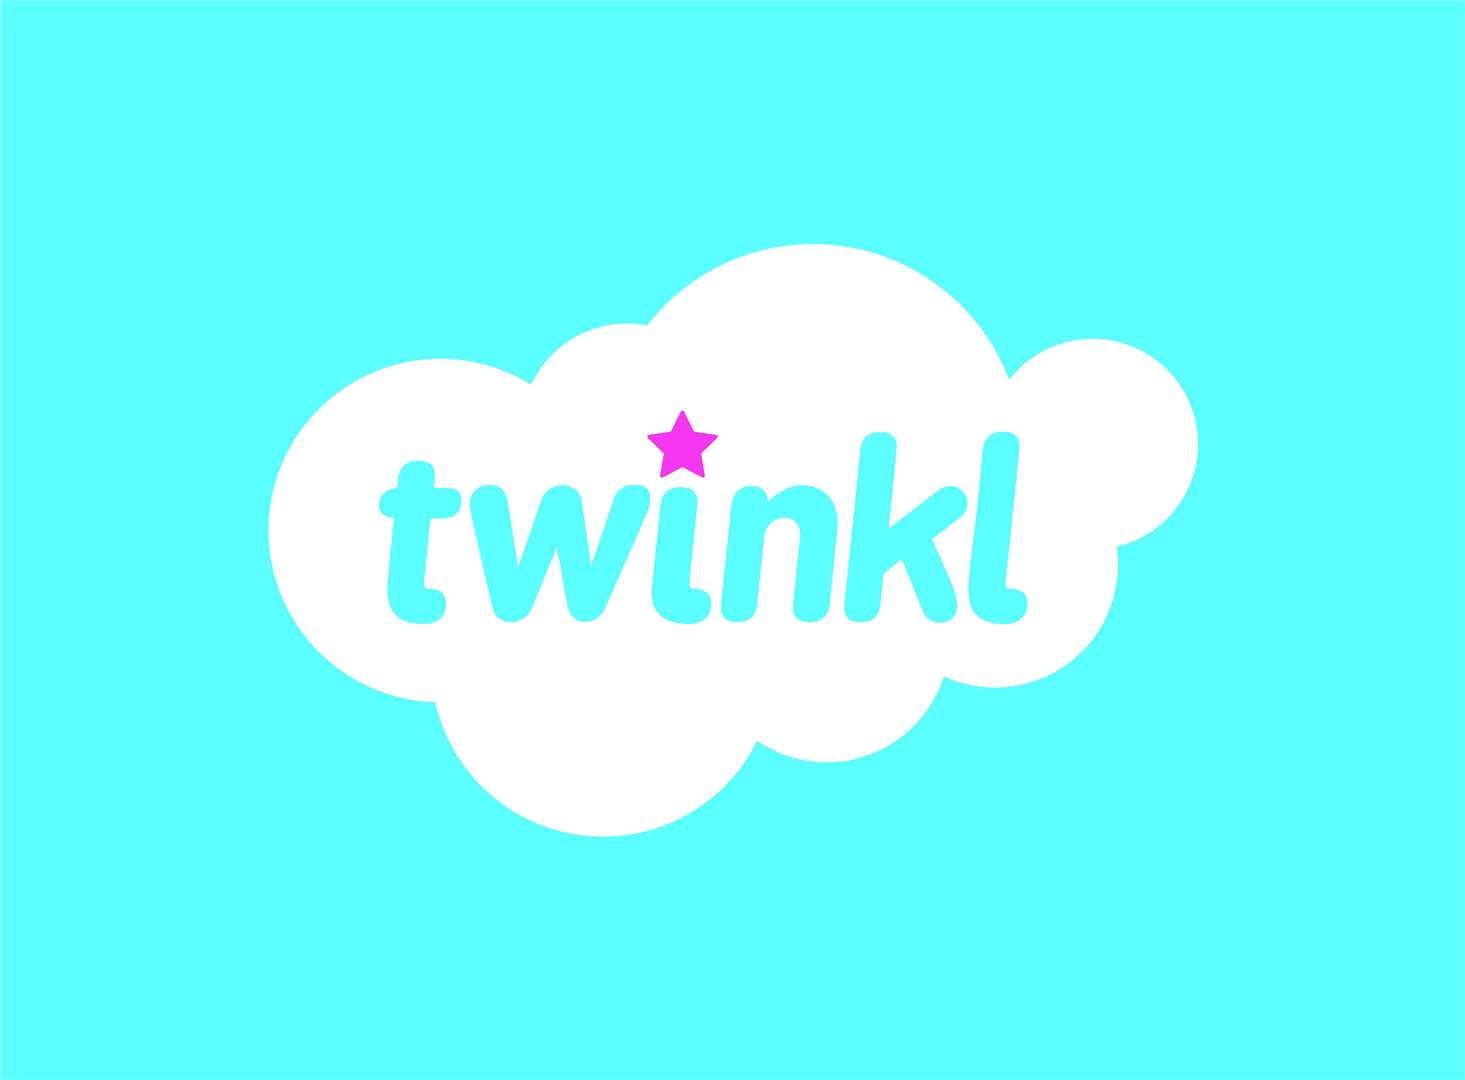 Twinkle is used by schools across the country and is now opening its services up to families forced to school at home